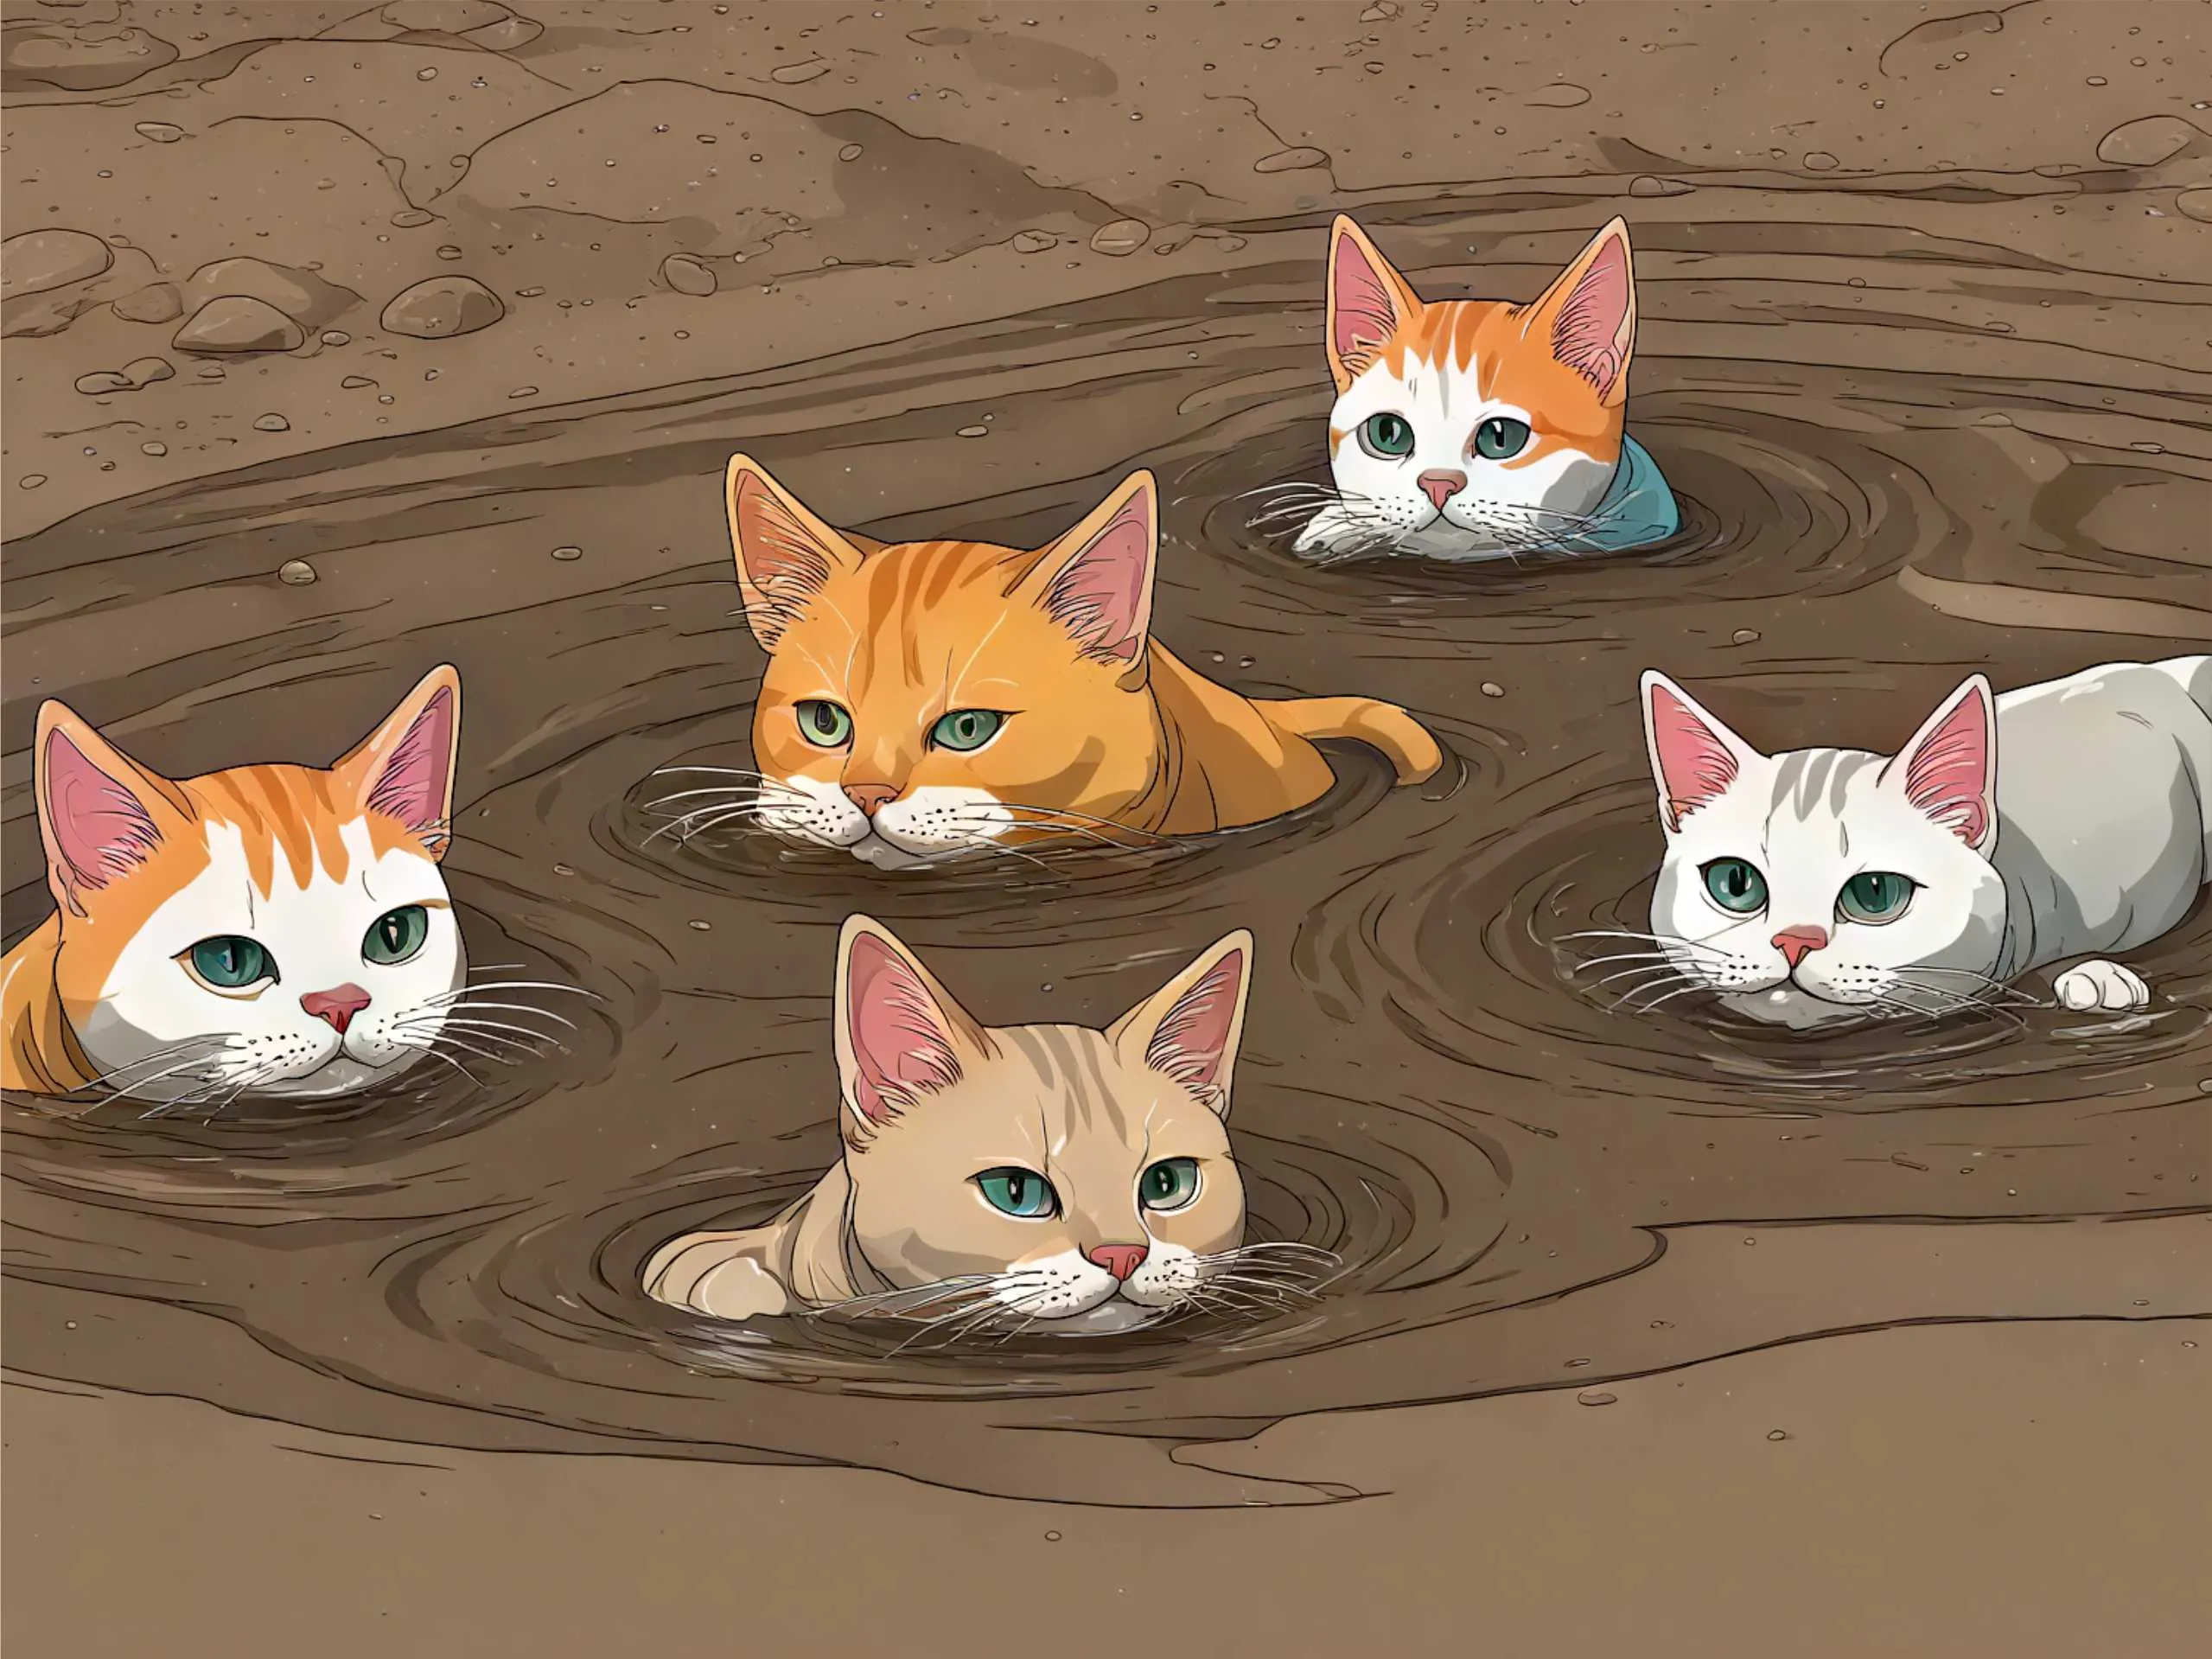 cats drowned in mud